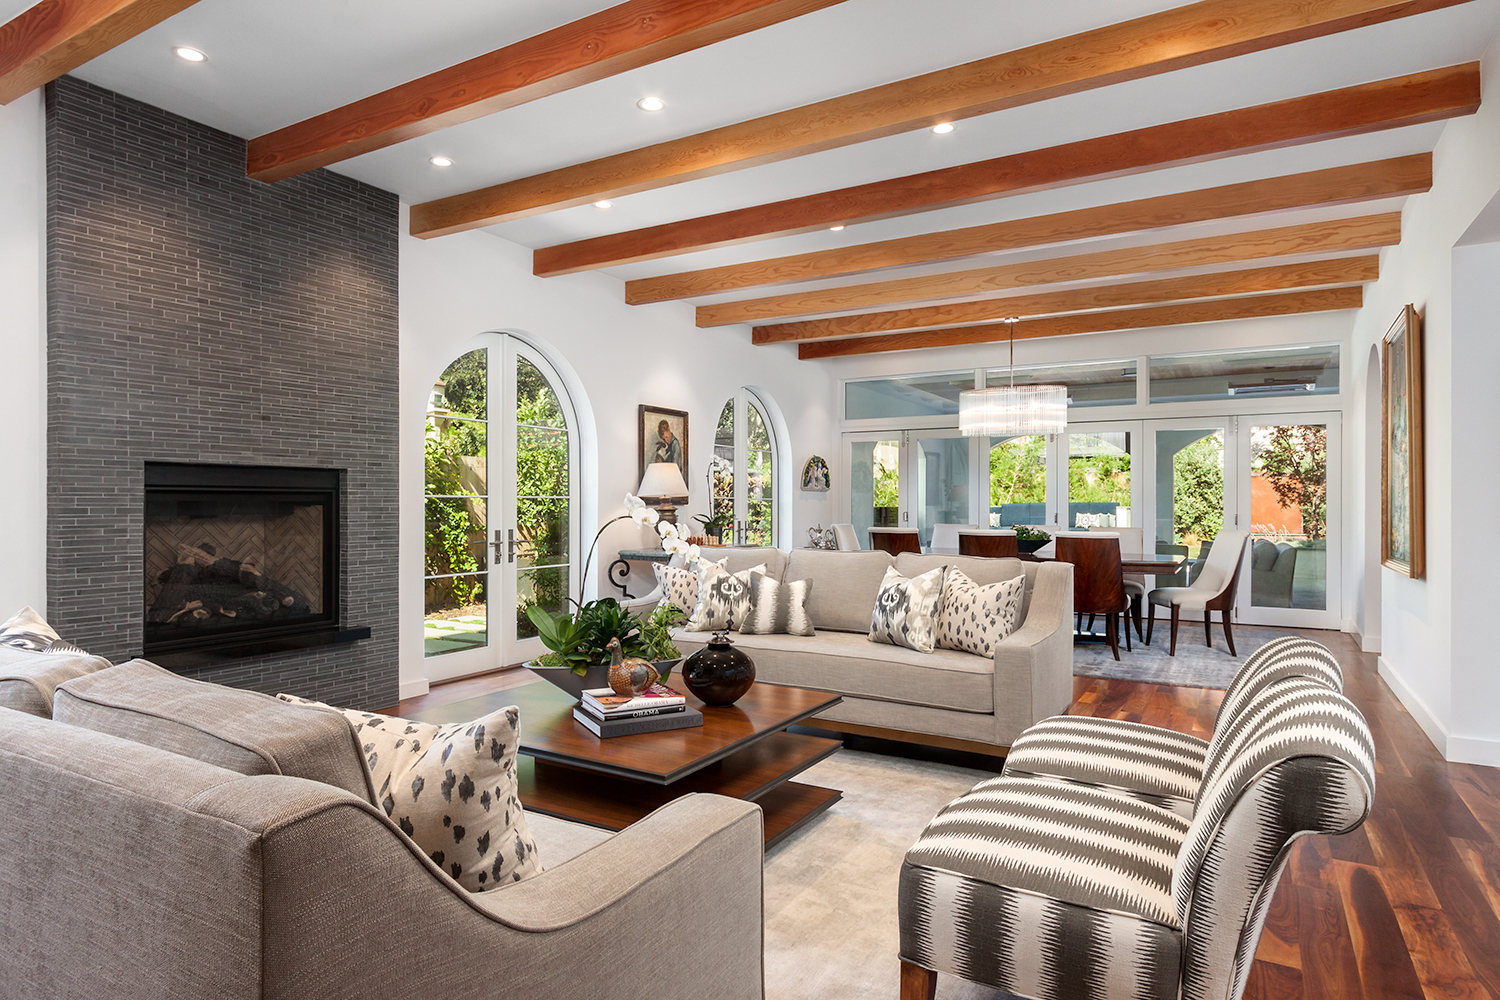 living room with fireplace and grey stone wall accent. White wall and exposed wooden beam ceiling and wood flooring